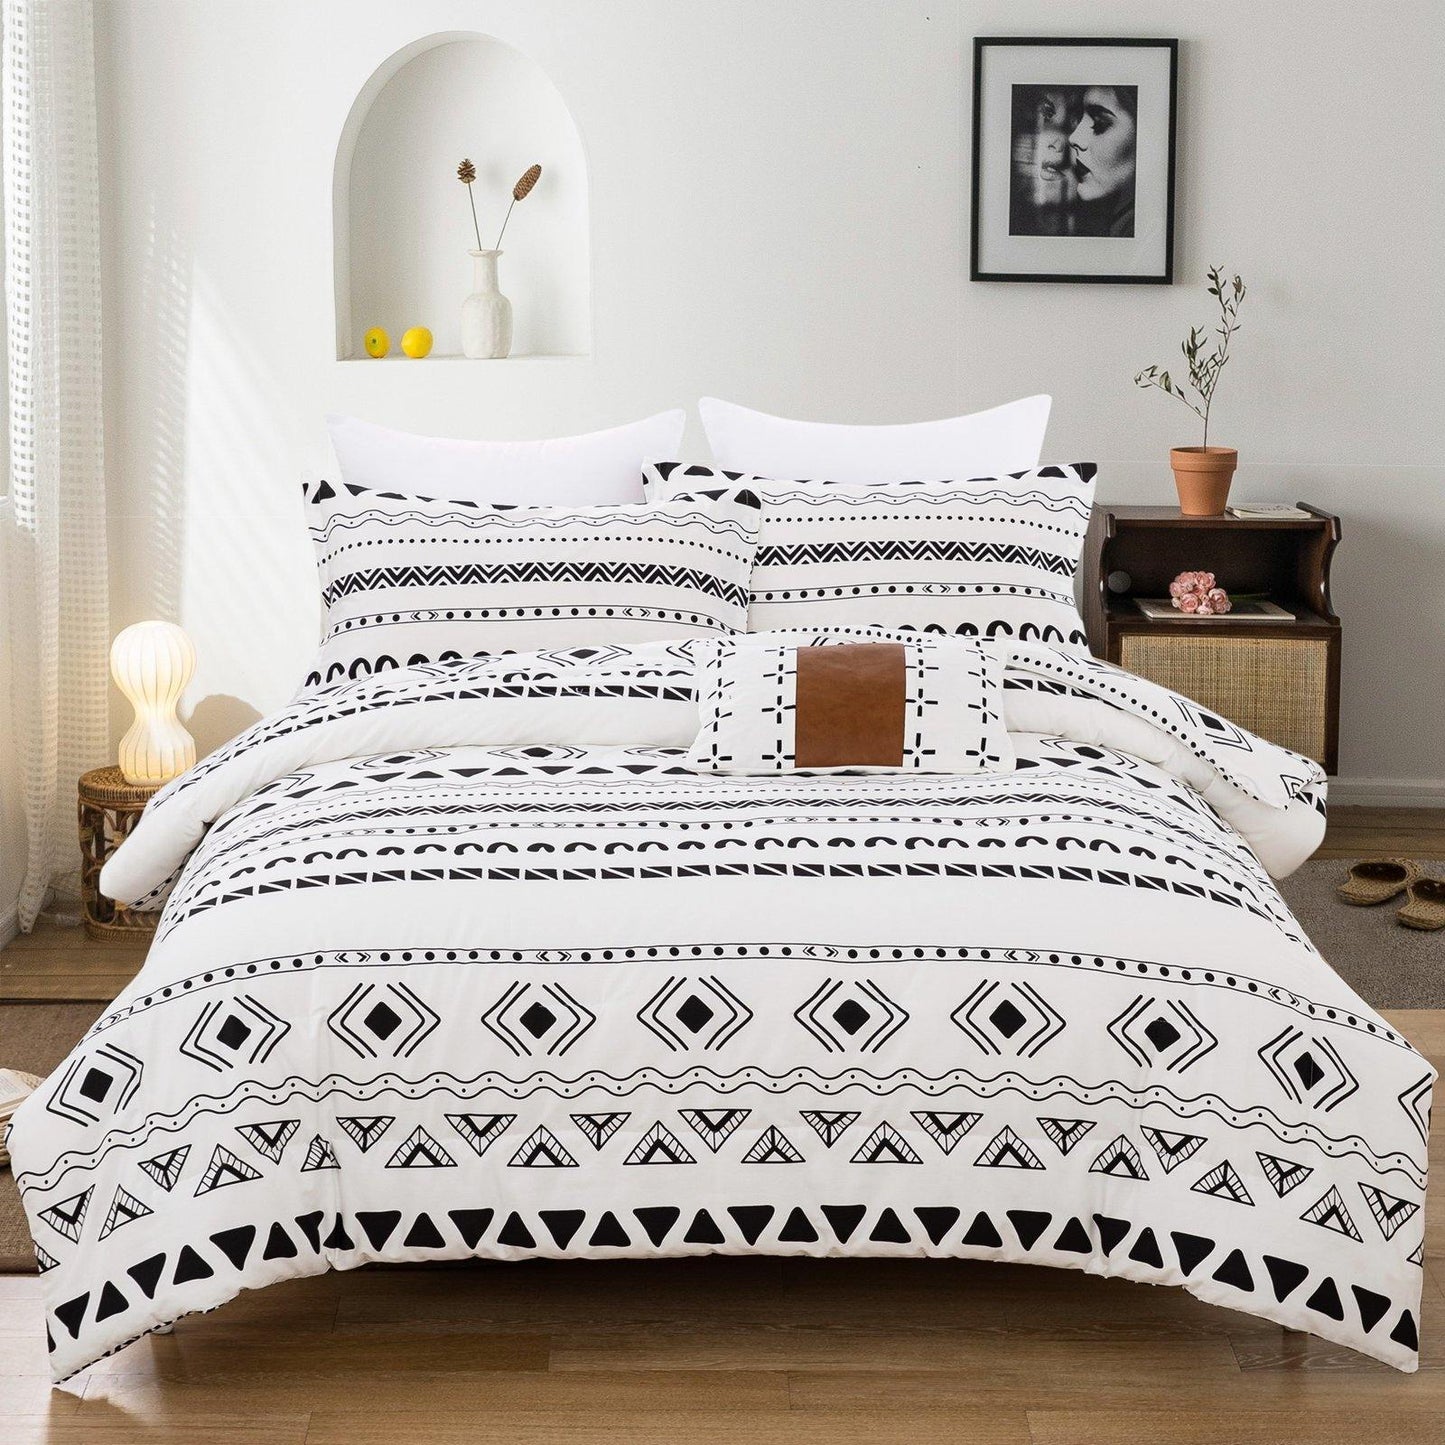 WONGS BEDDING 100% cotton Black stripe pattern Comforter set 3 Pieces Bedding Comforter with 2 Pillow Cases suitable for the whole season - Wongs bedding